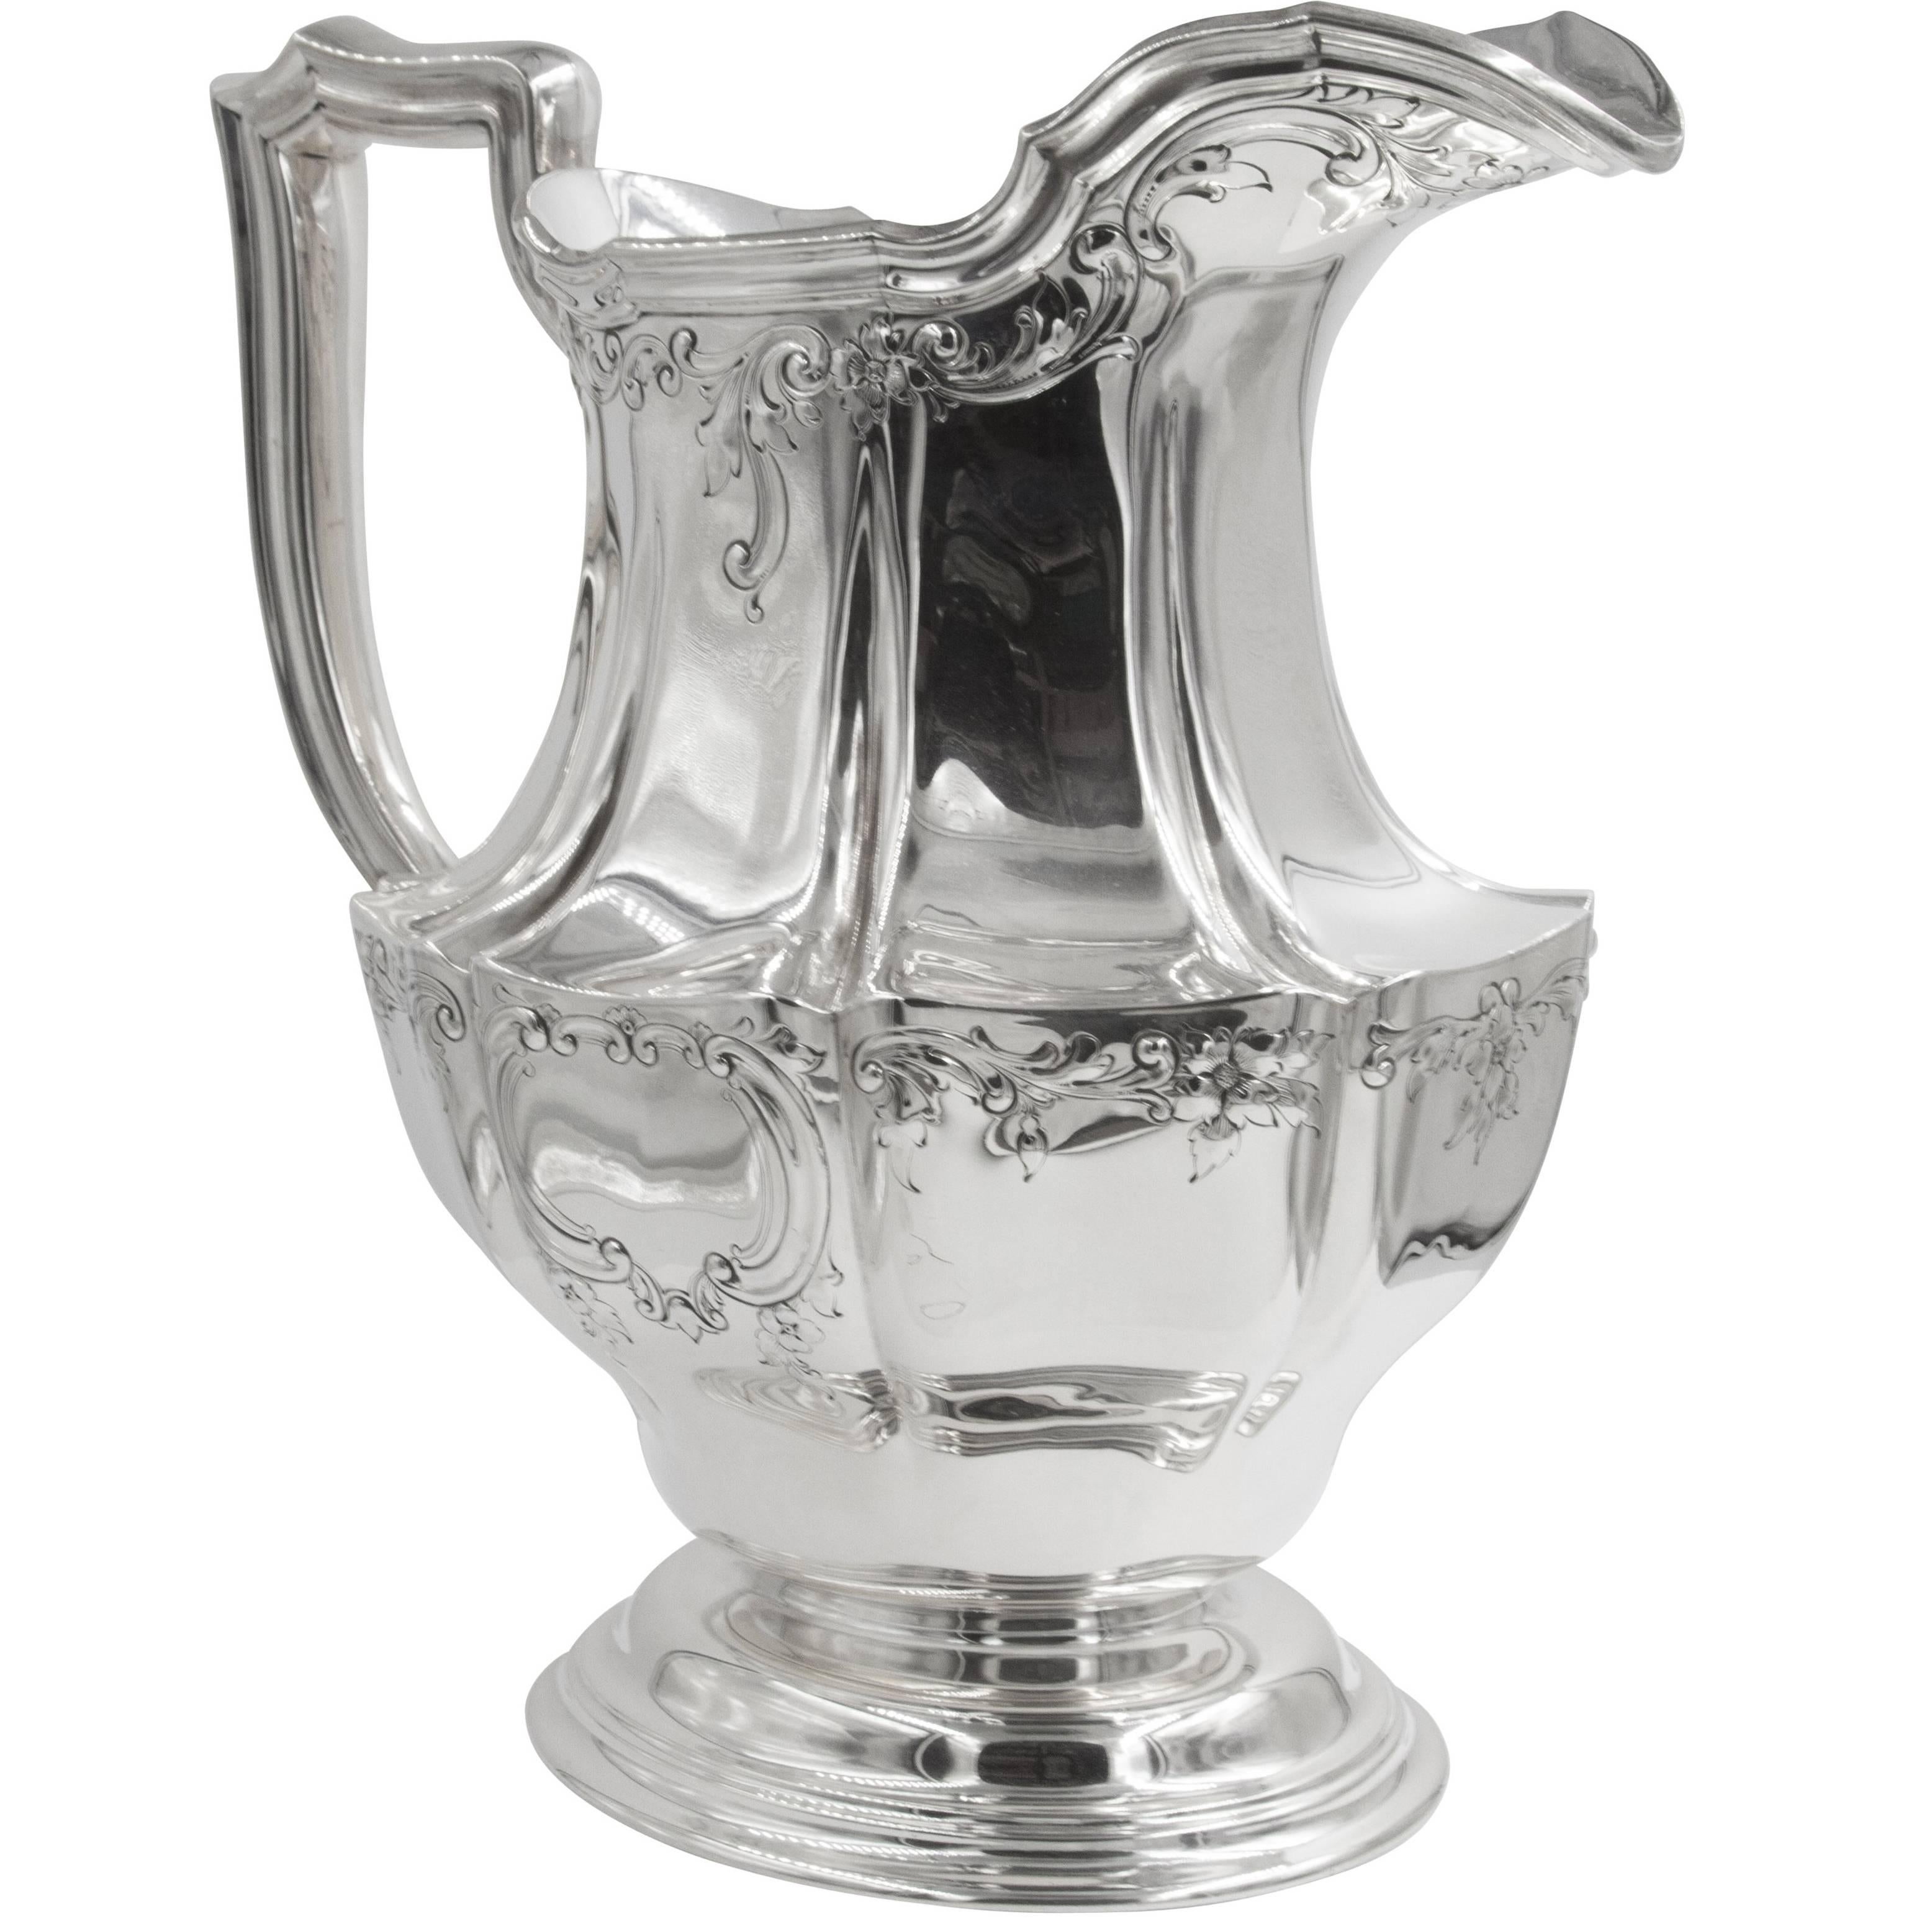 Oval shaped with delicate etching around the top and middle of the pitcher. Notice the elegant shape of the handle and the indentations throughout the body. This piece is sure to catch everyone's attention!